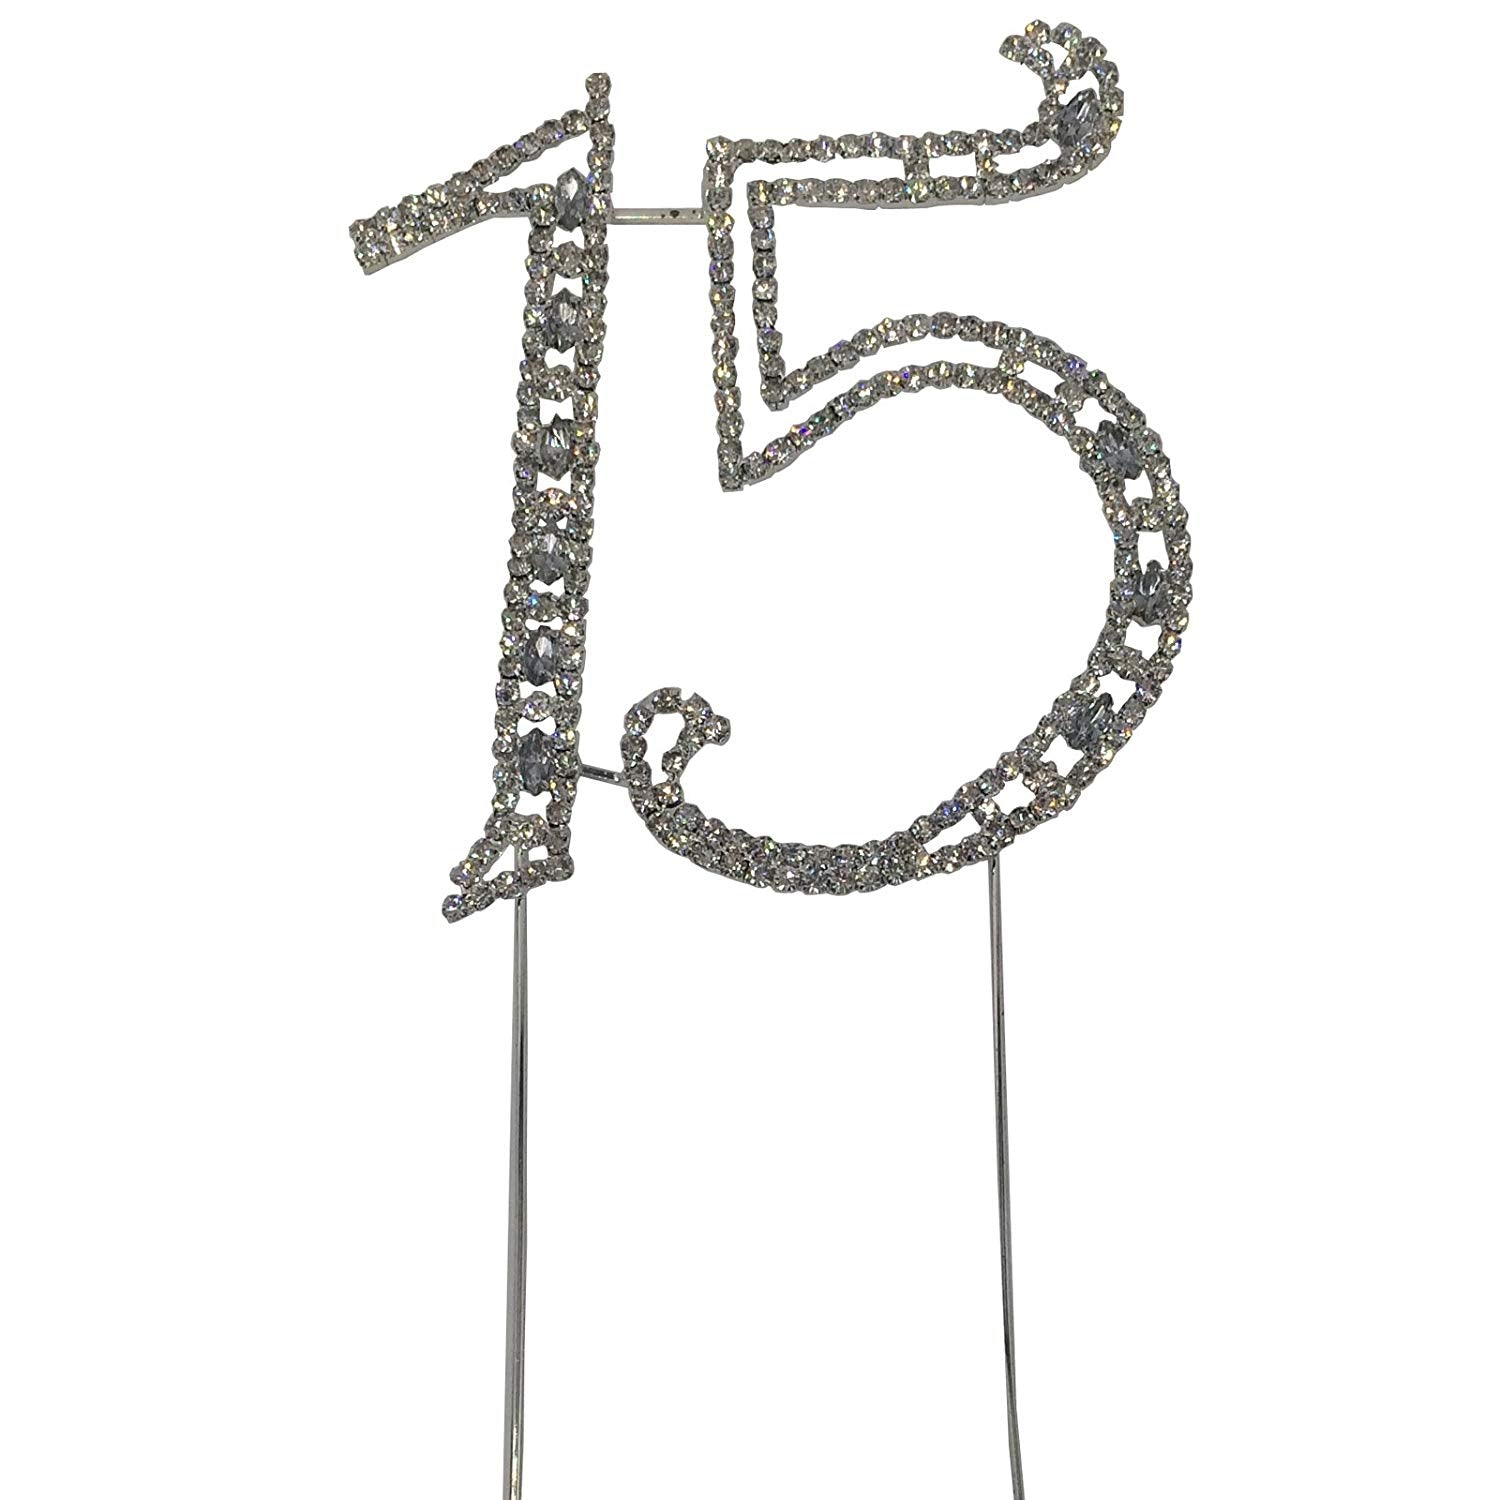 Large Number 15 Diamante Aniversary Wedding Party Cake Topper Pick 8-inch